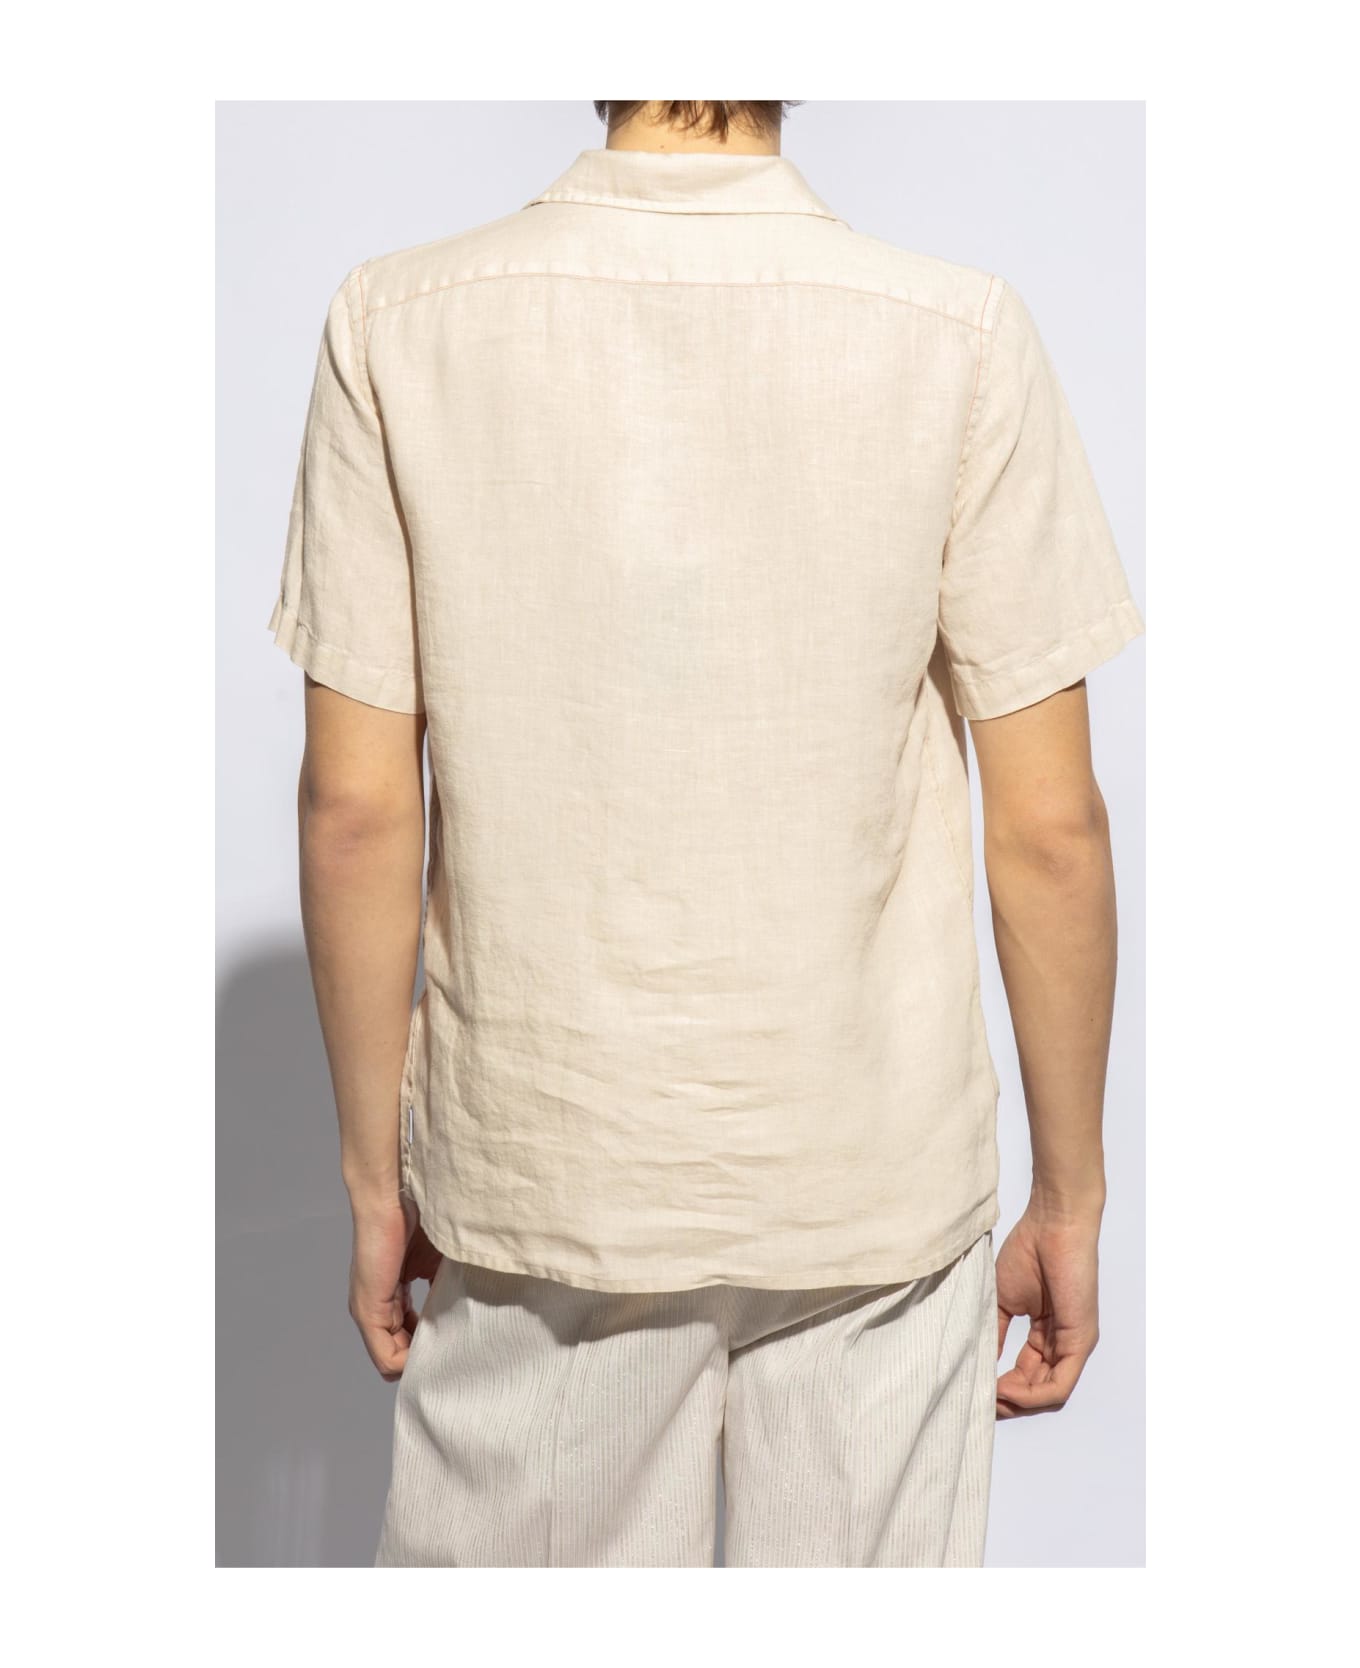 Paul Smith Linen Shirt With Short Sleeves - Beige シャツ